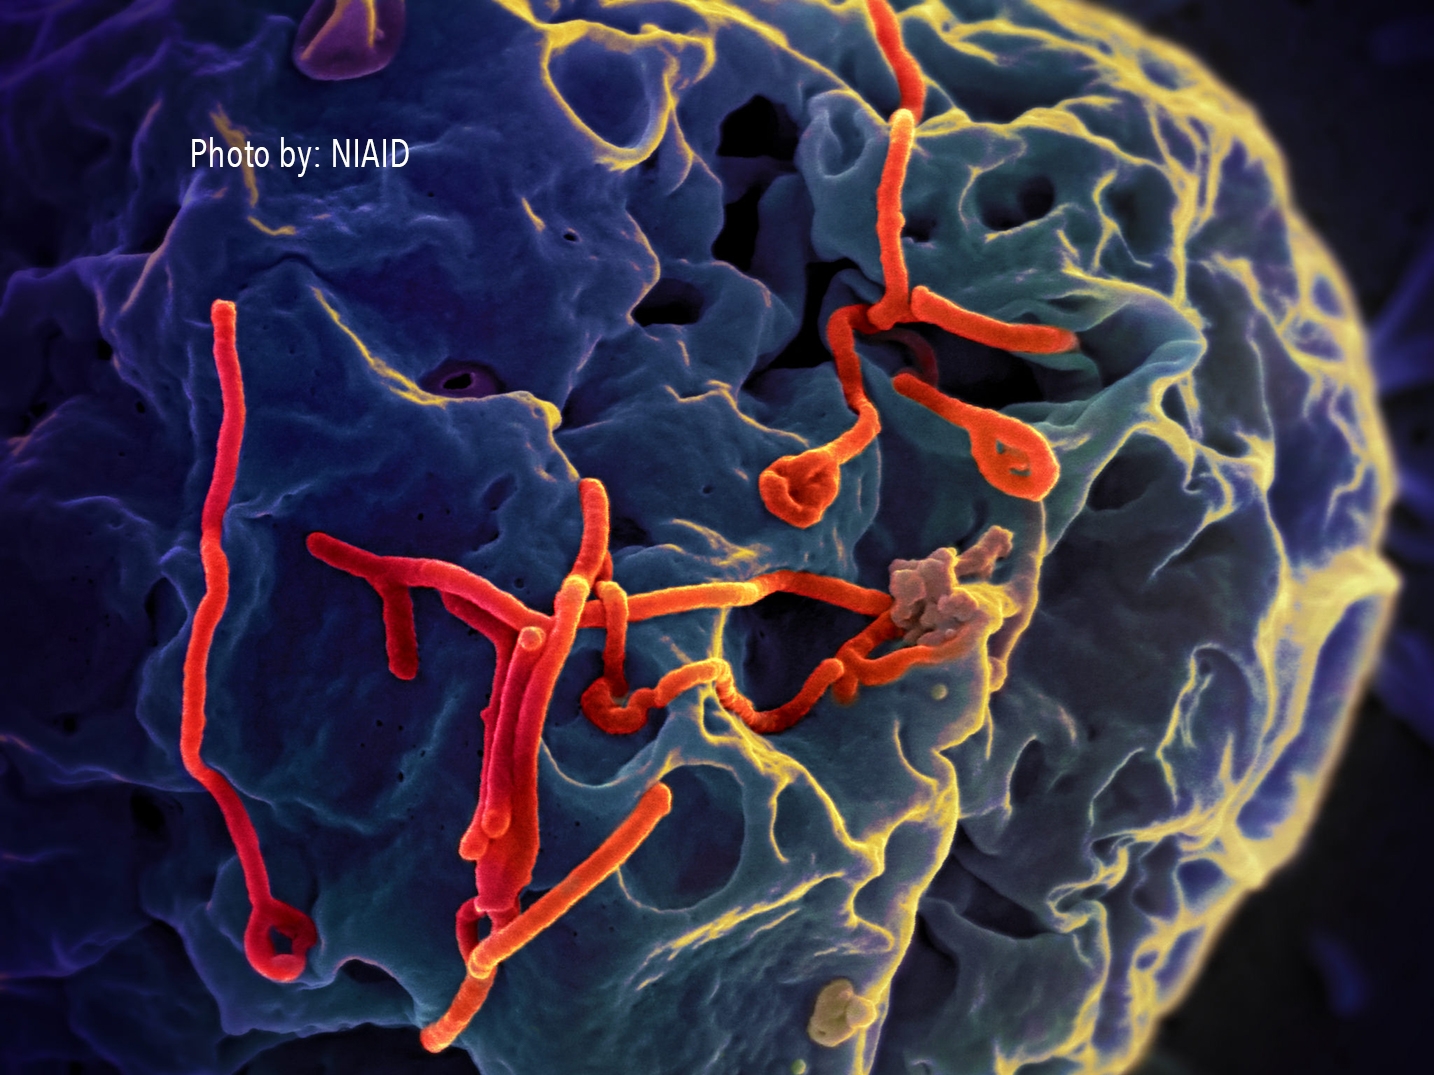 ASU engineer's lab partnering with US Army to improve Ebola detection